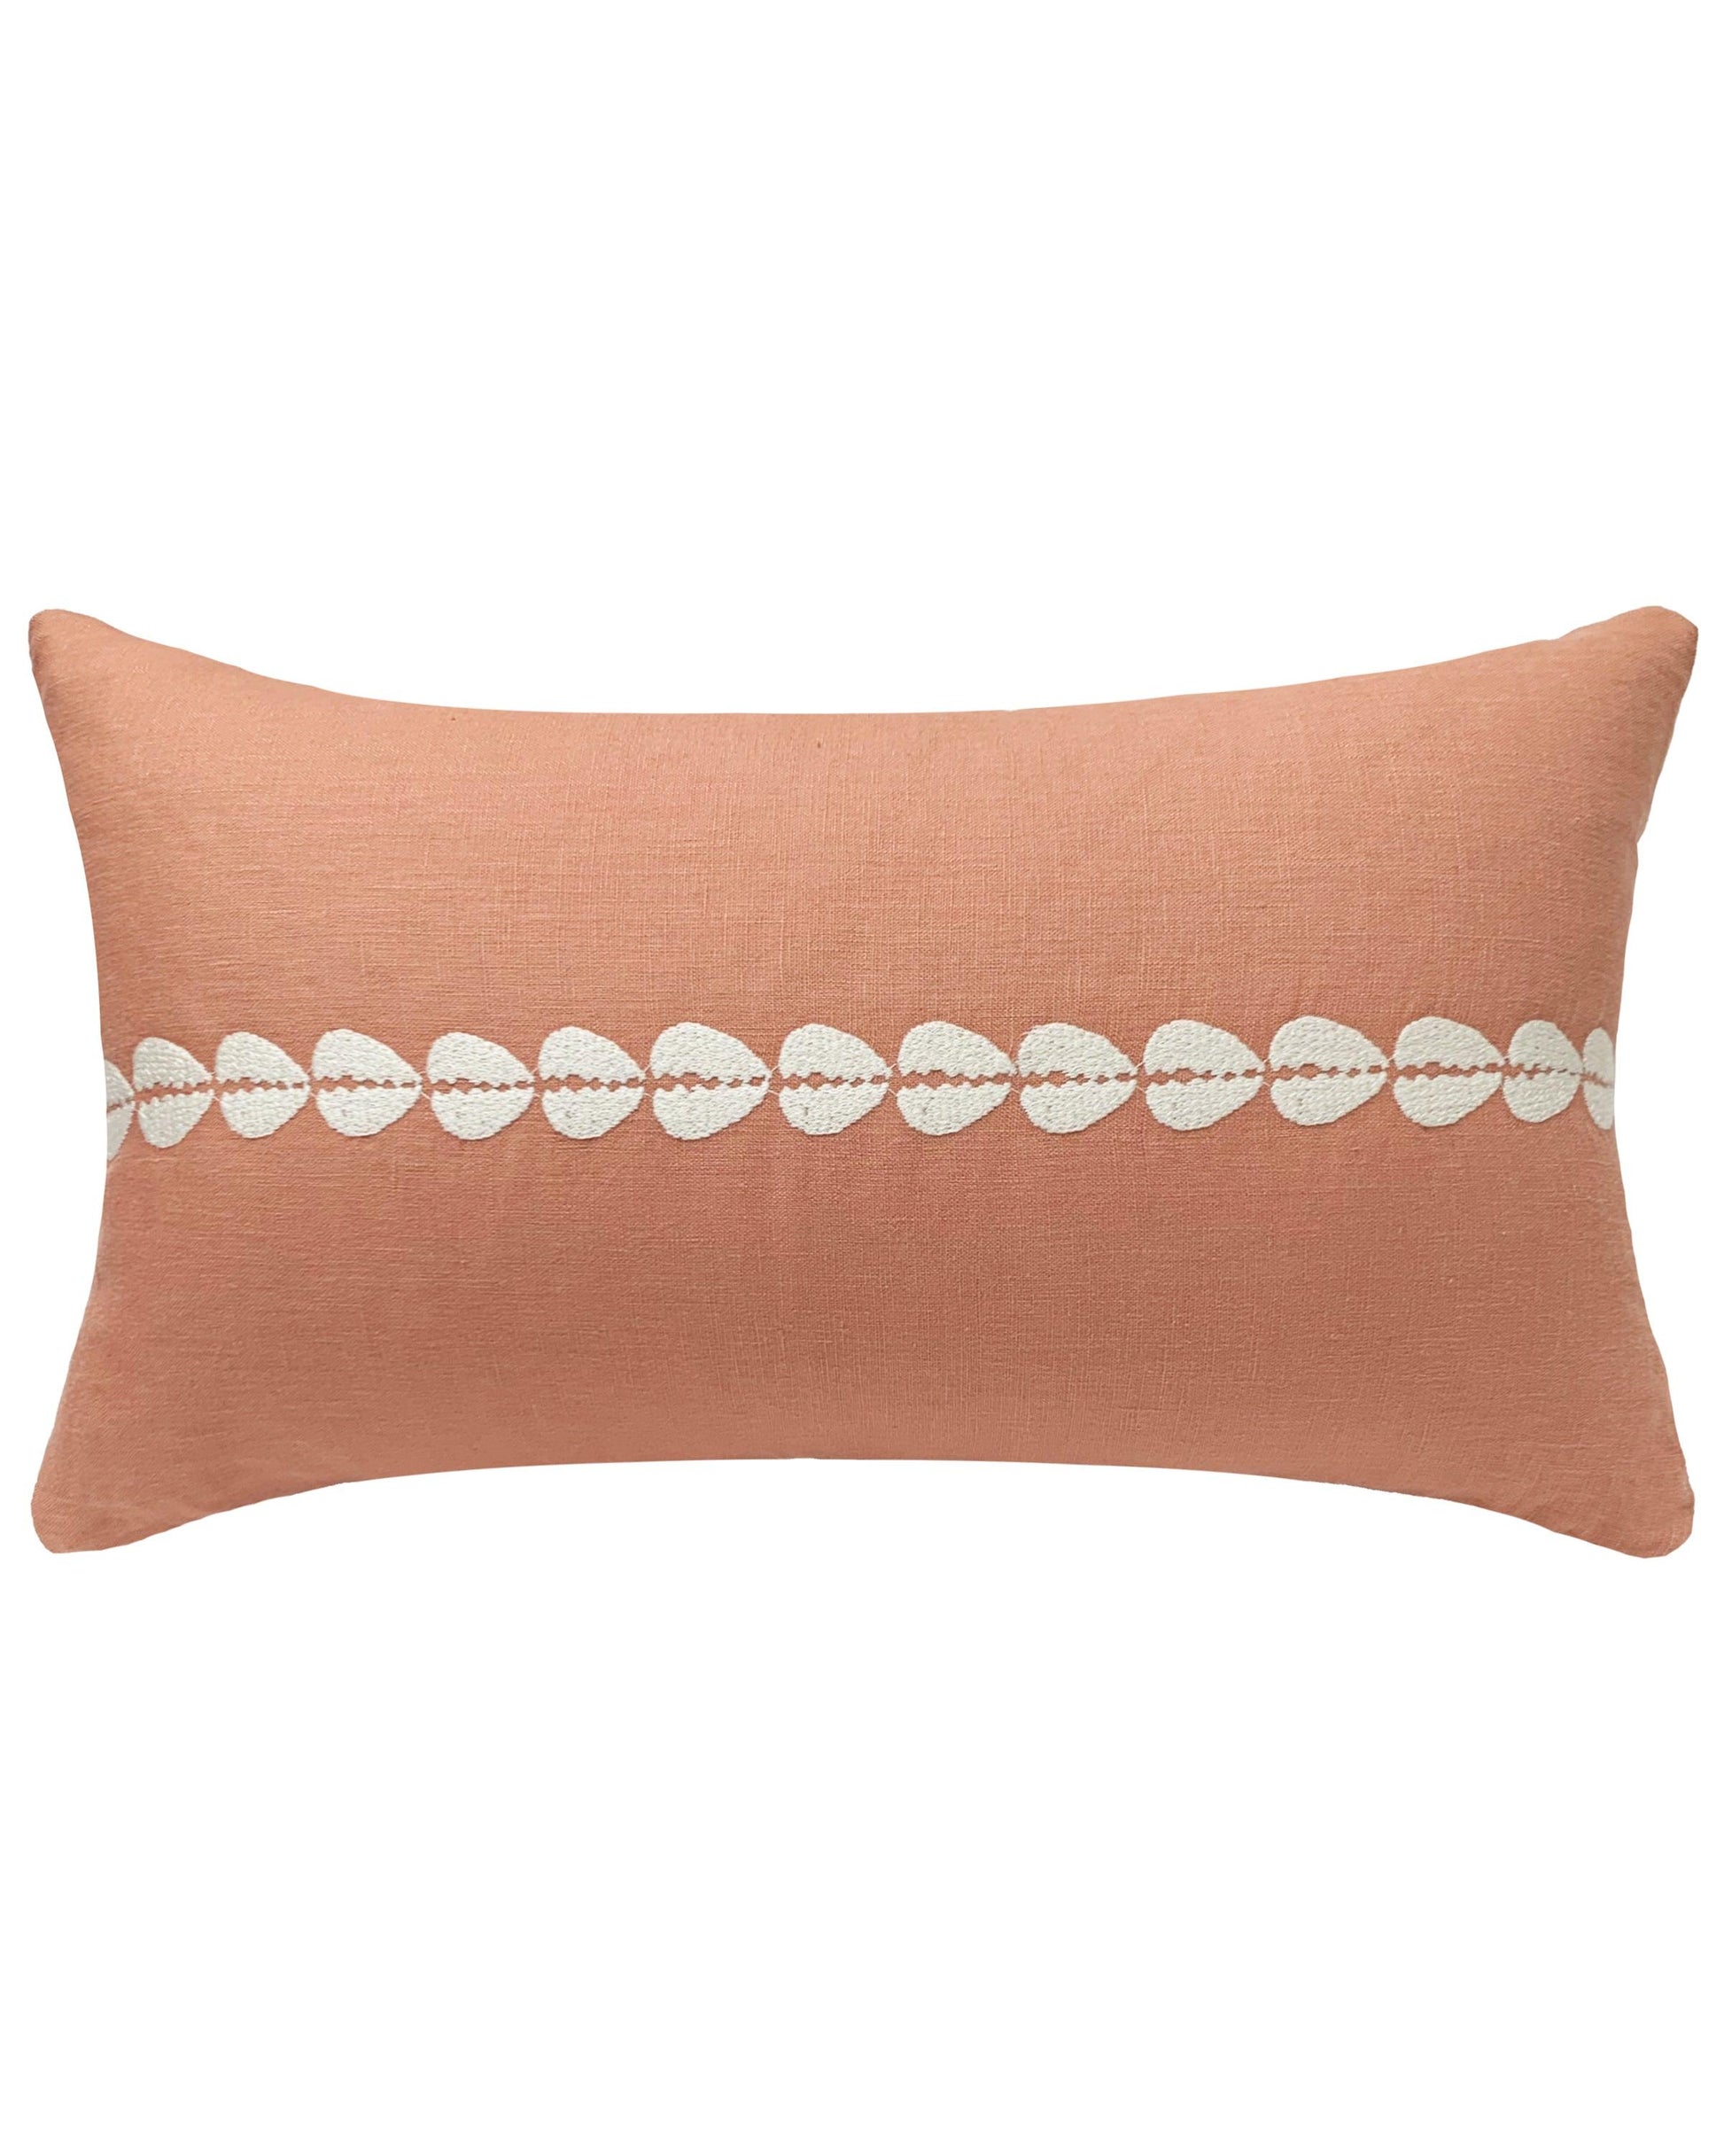 PILLOWPIA cowrie embroidered lumbar pillow in sandalwood